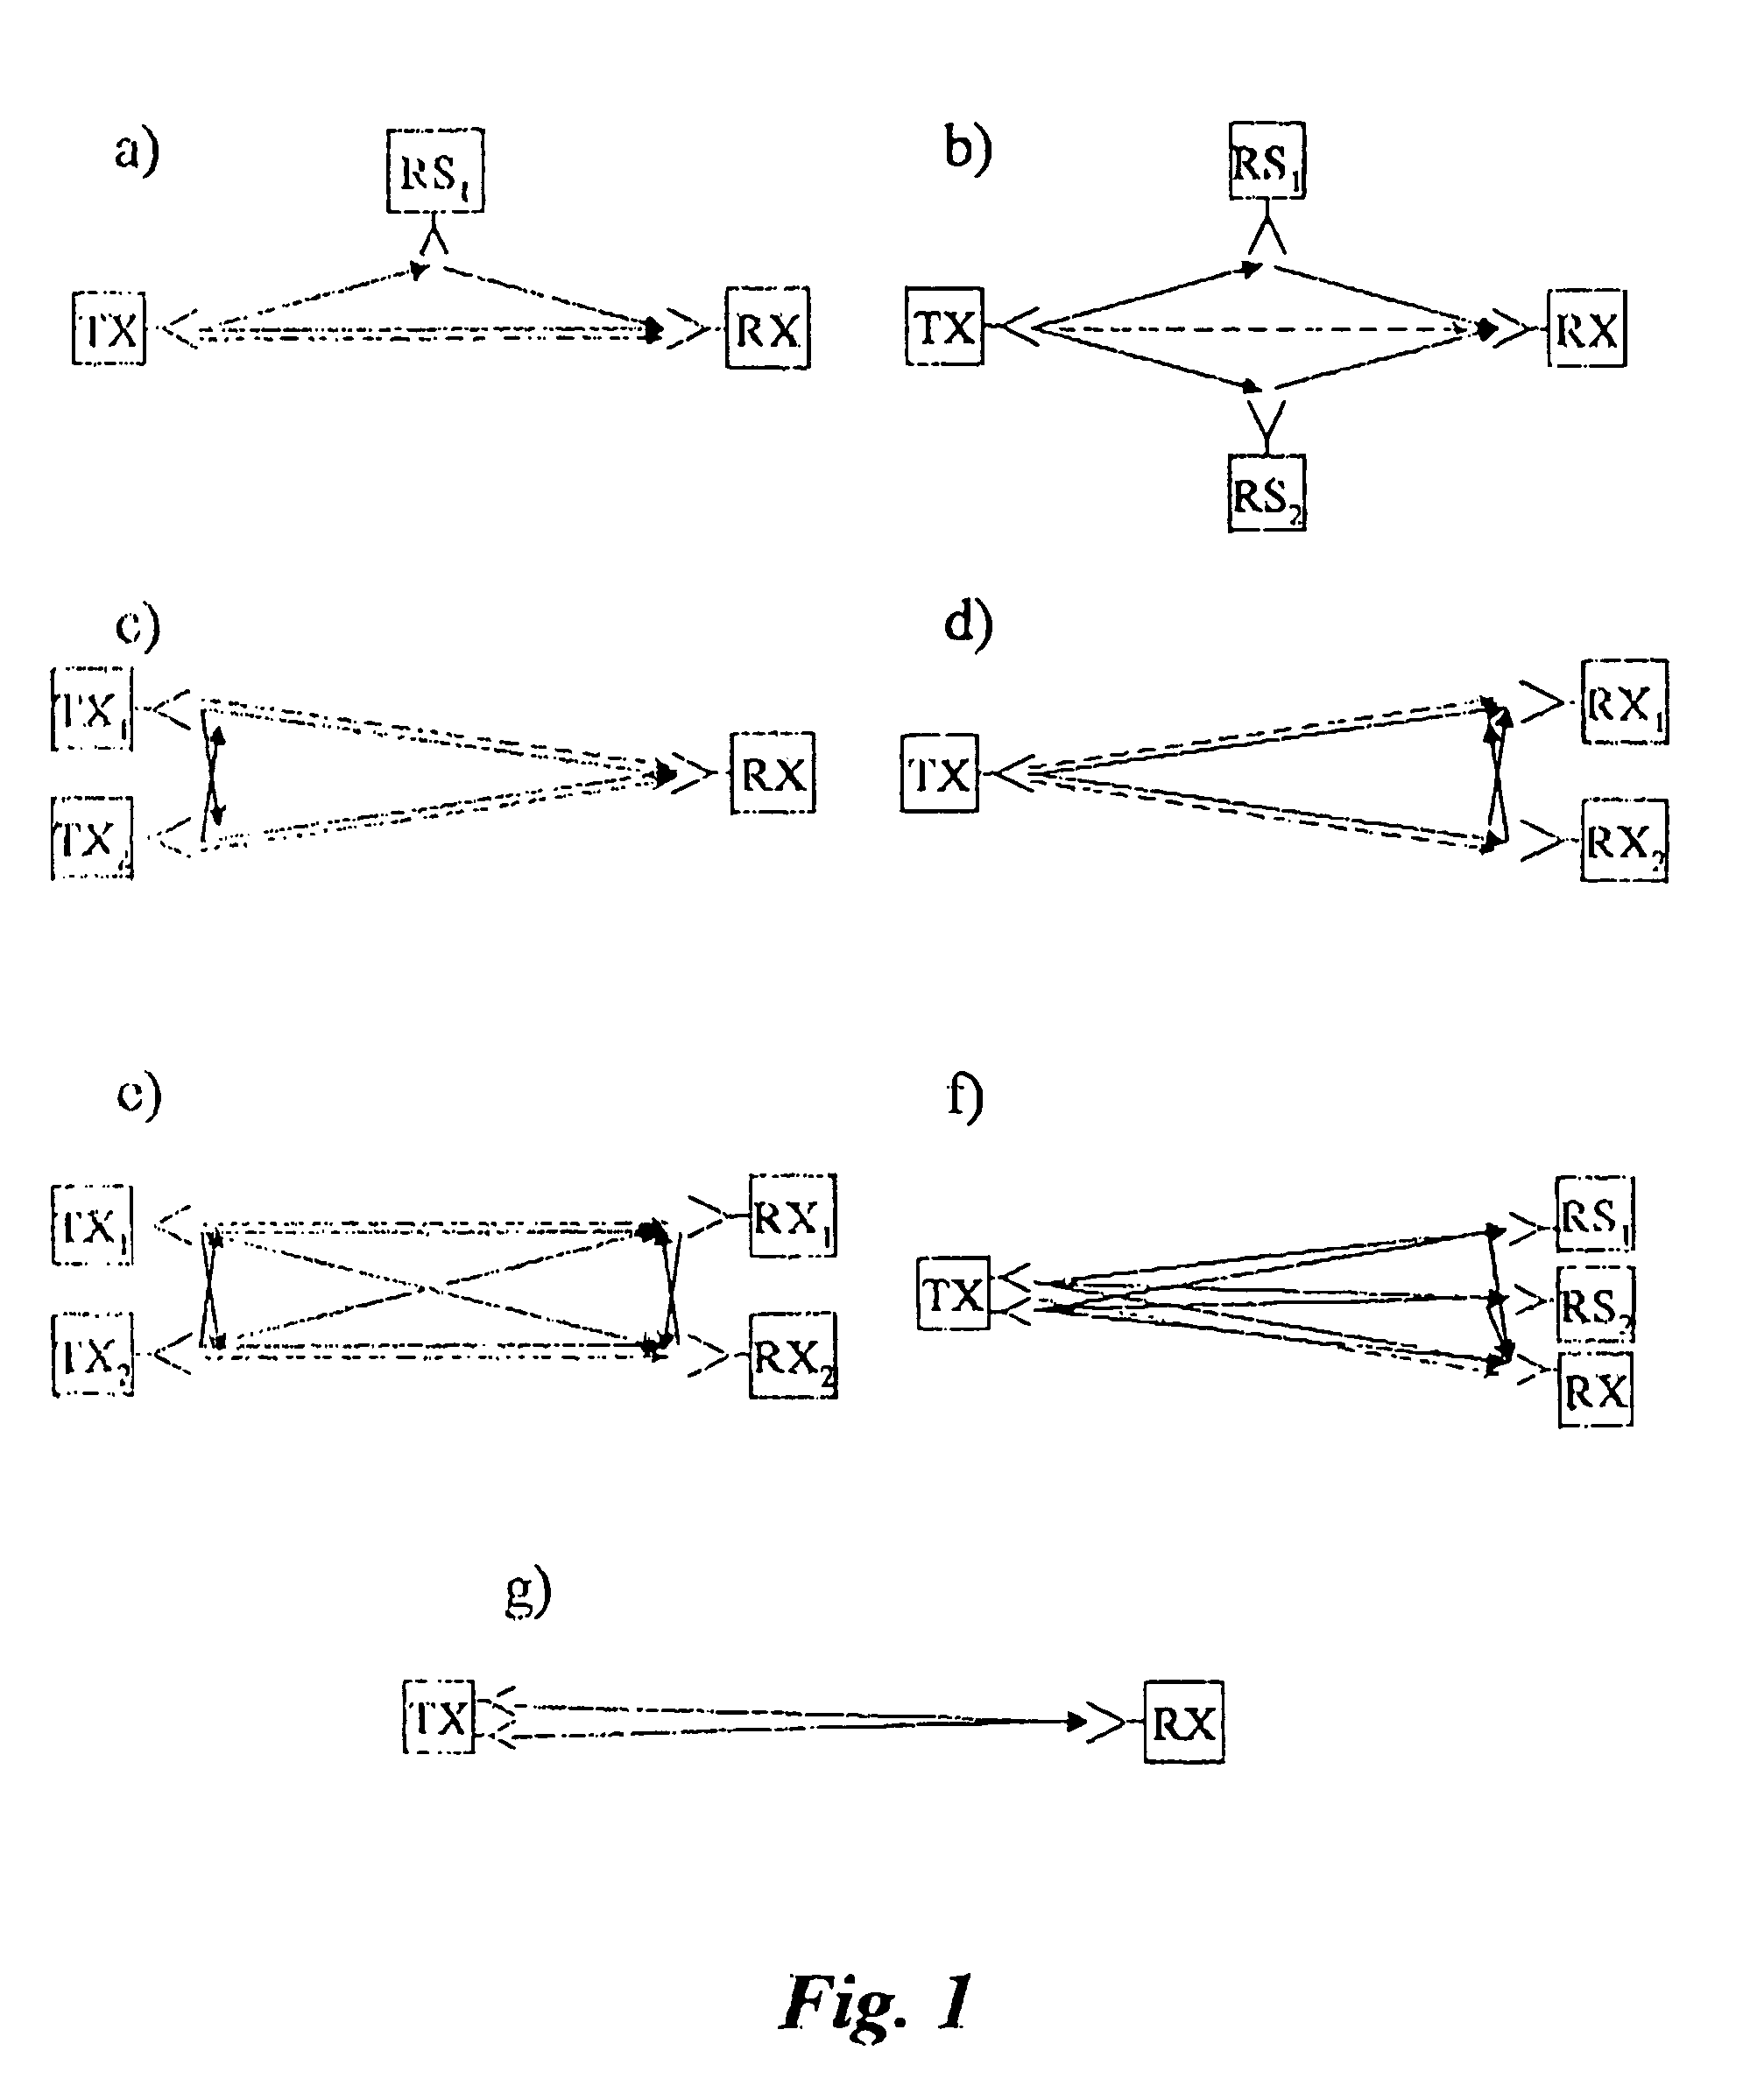 Method and architecture for wireless communication networks using cooperative relaying